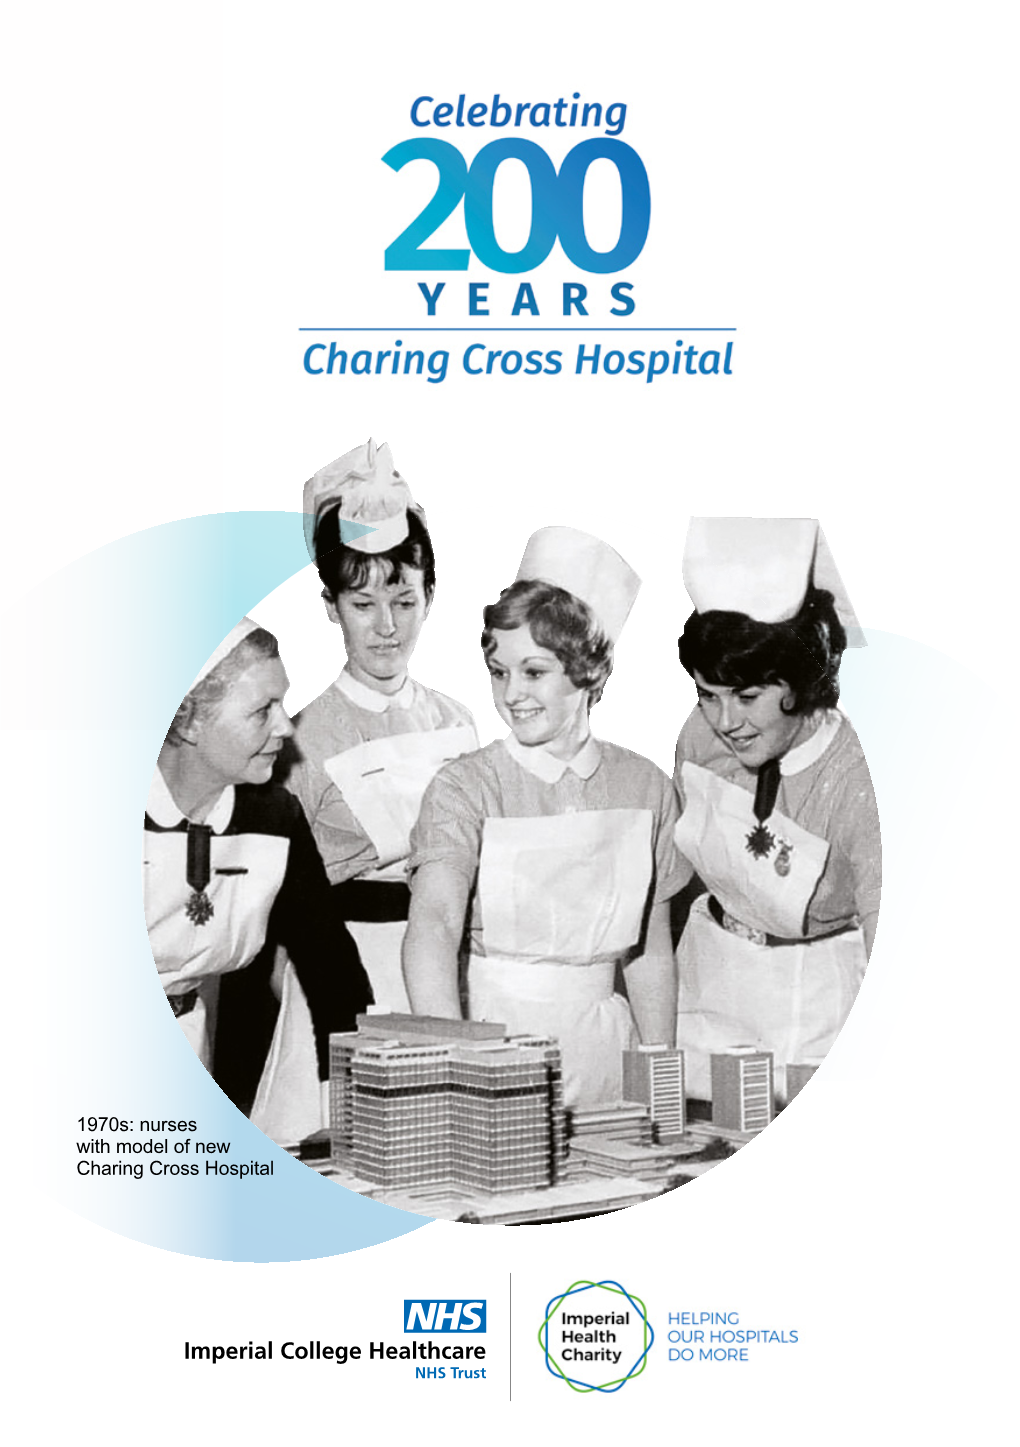 Download Our Brochure to Learn More About the History of Charing Cross